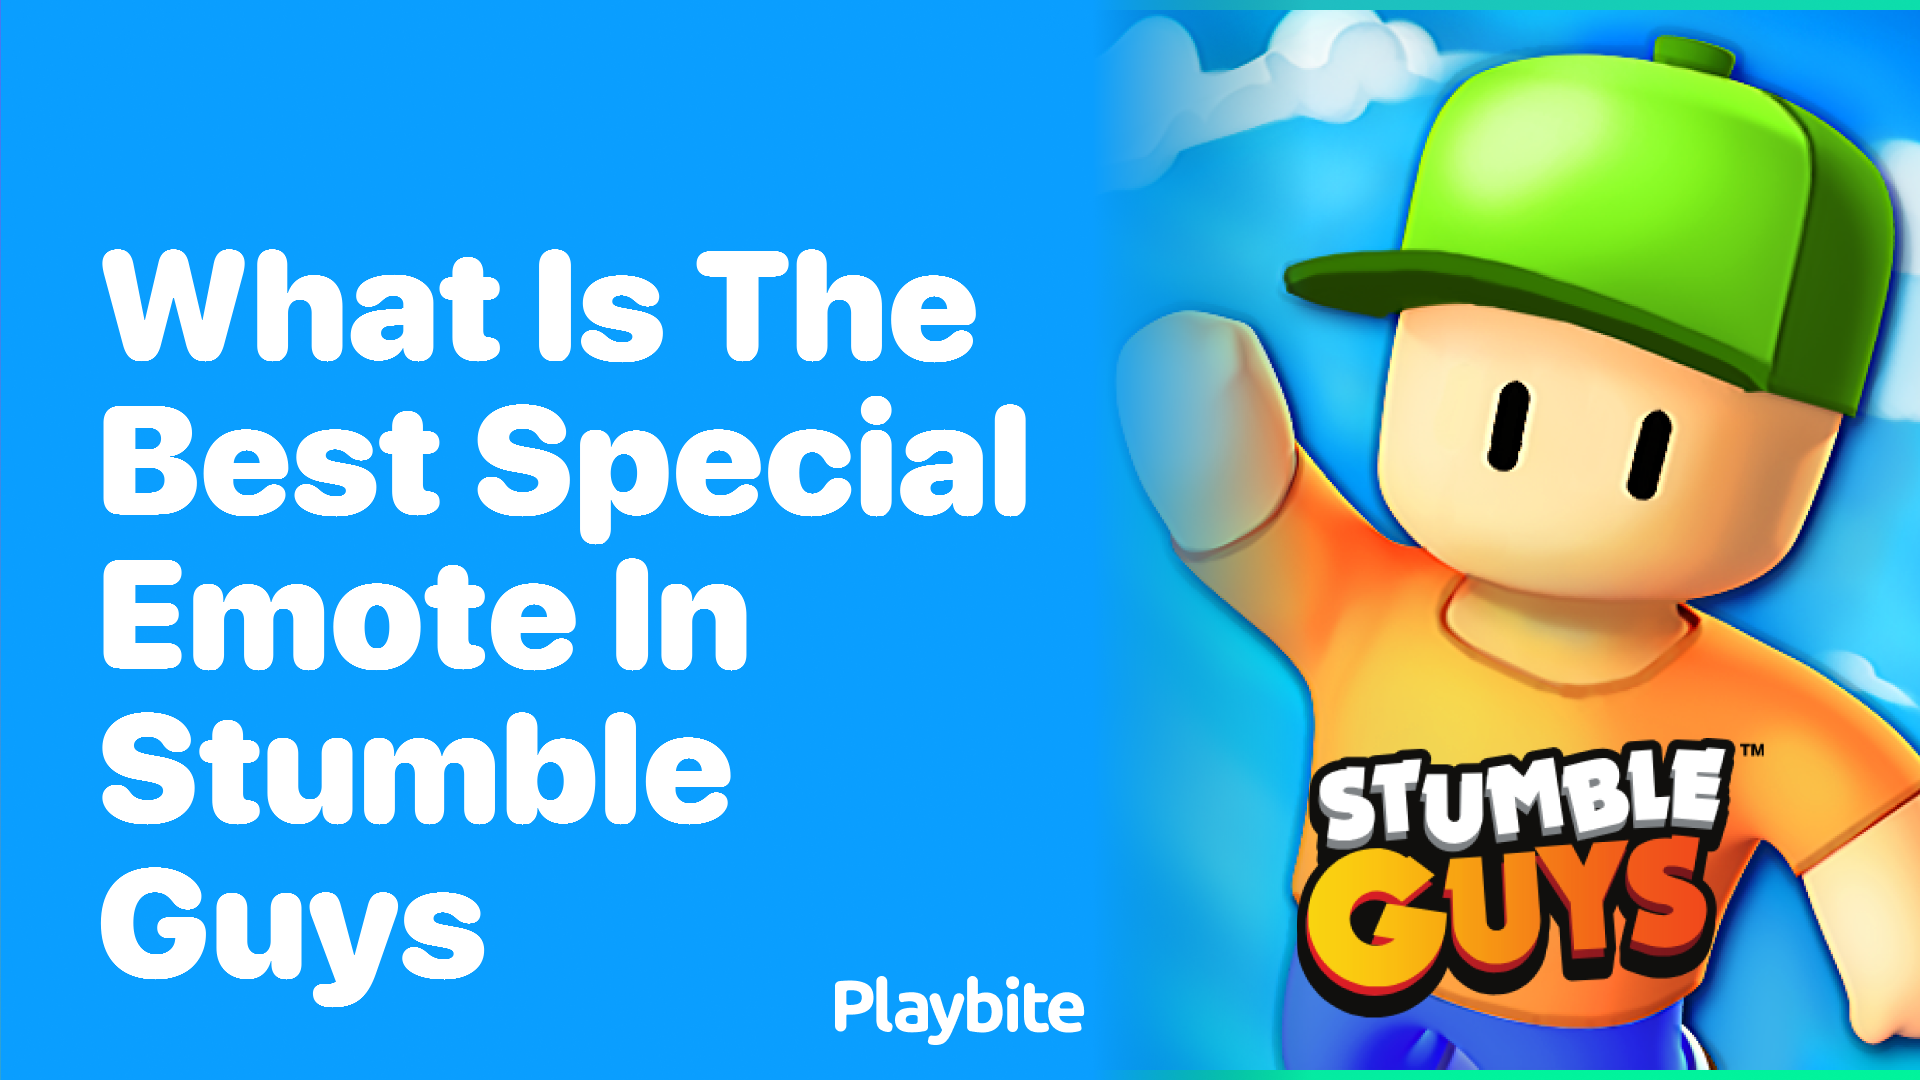 What Is the Best Special Emote in Stumble Guys?